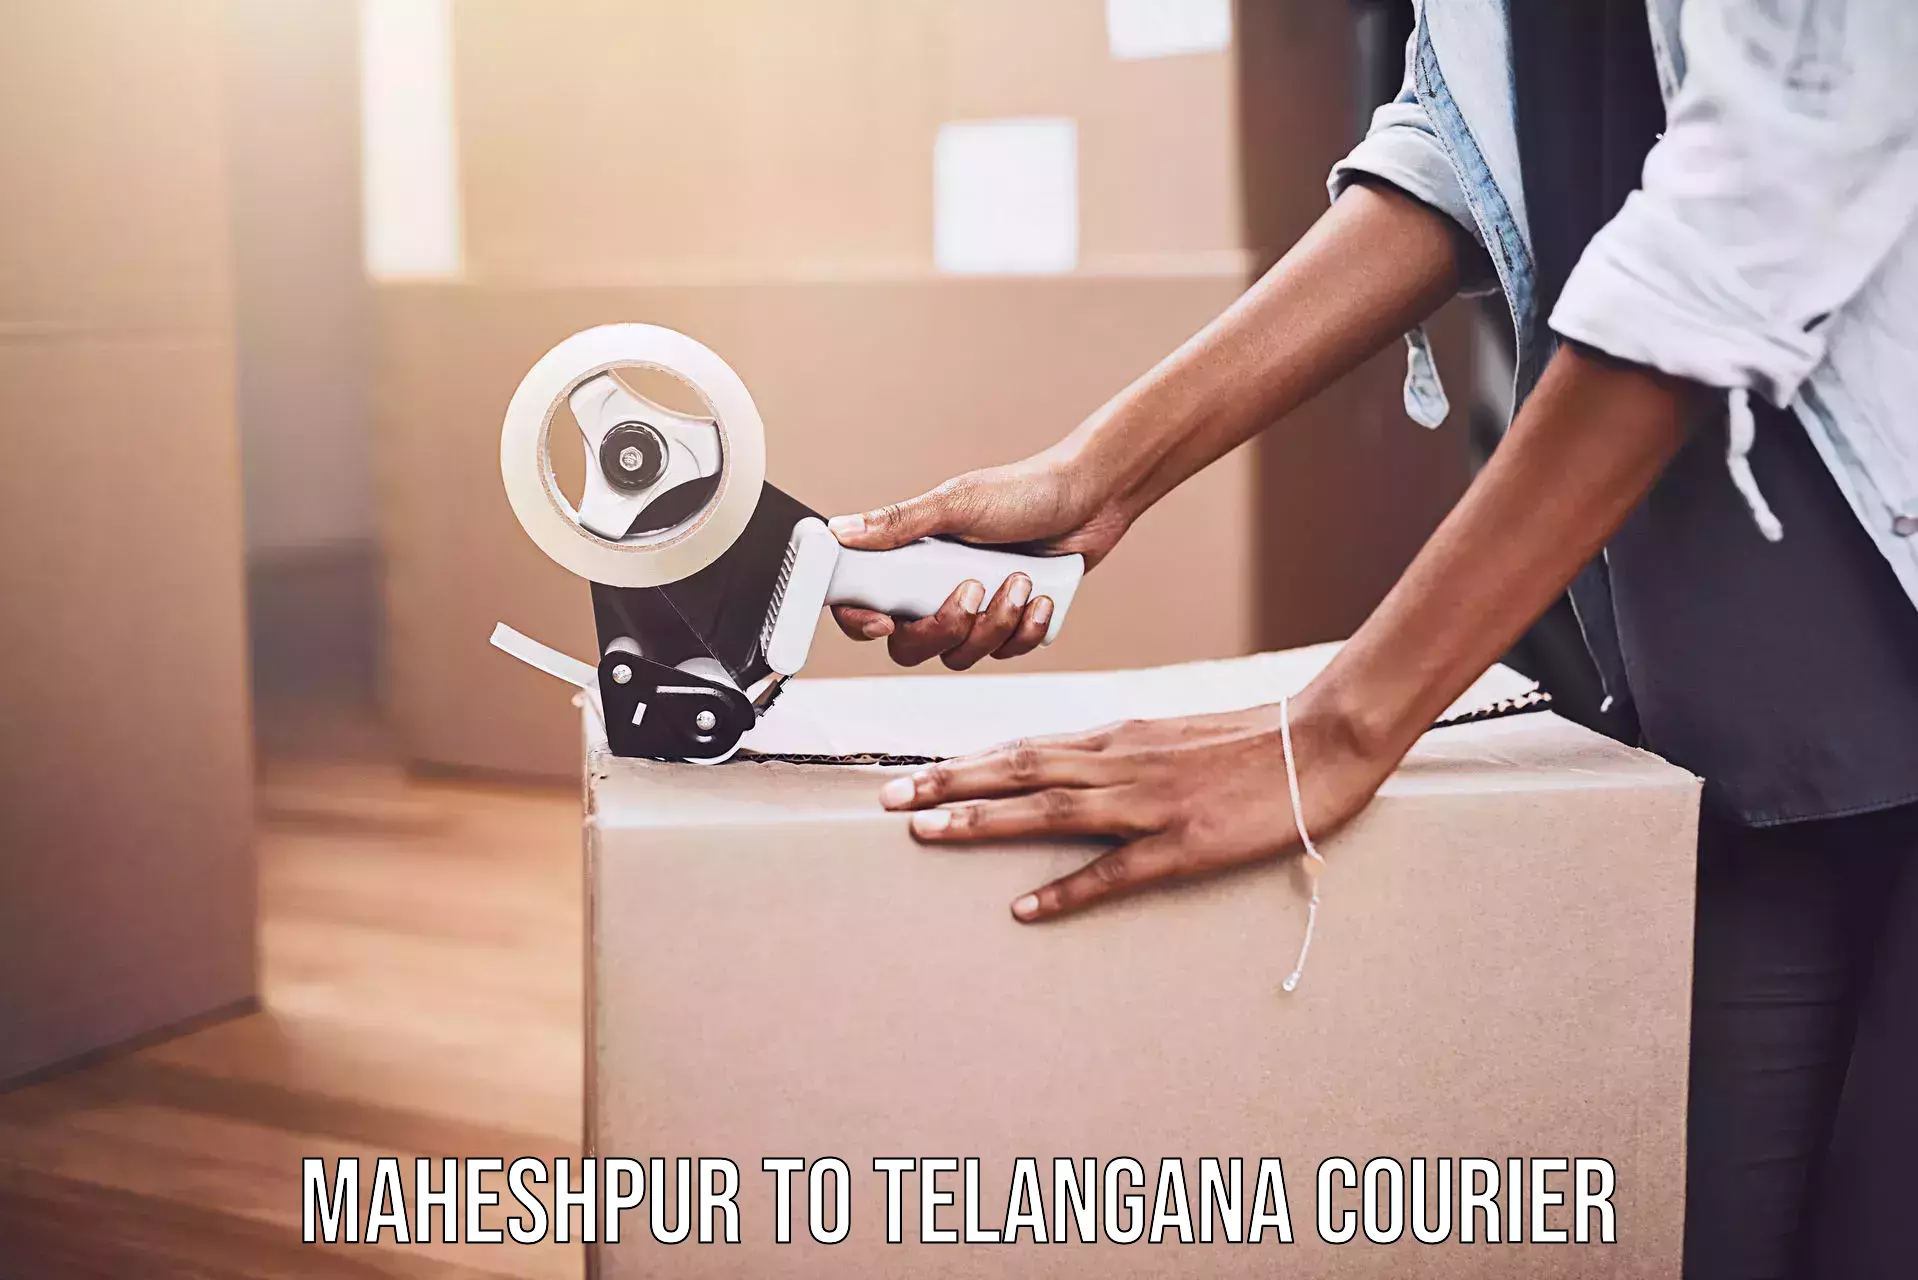 Reliable courier services Maheshpur to Gangadhara